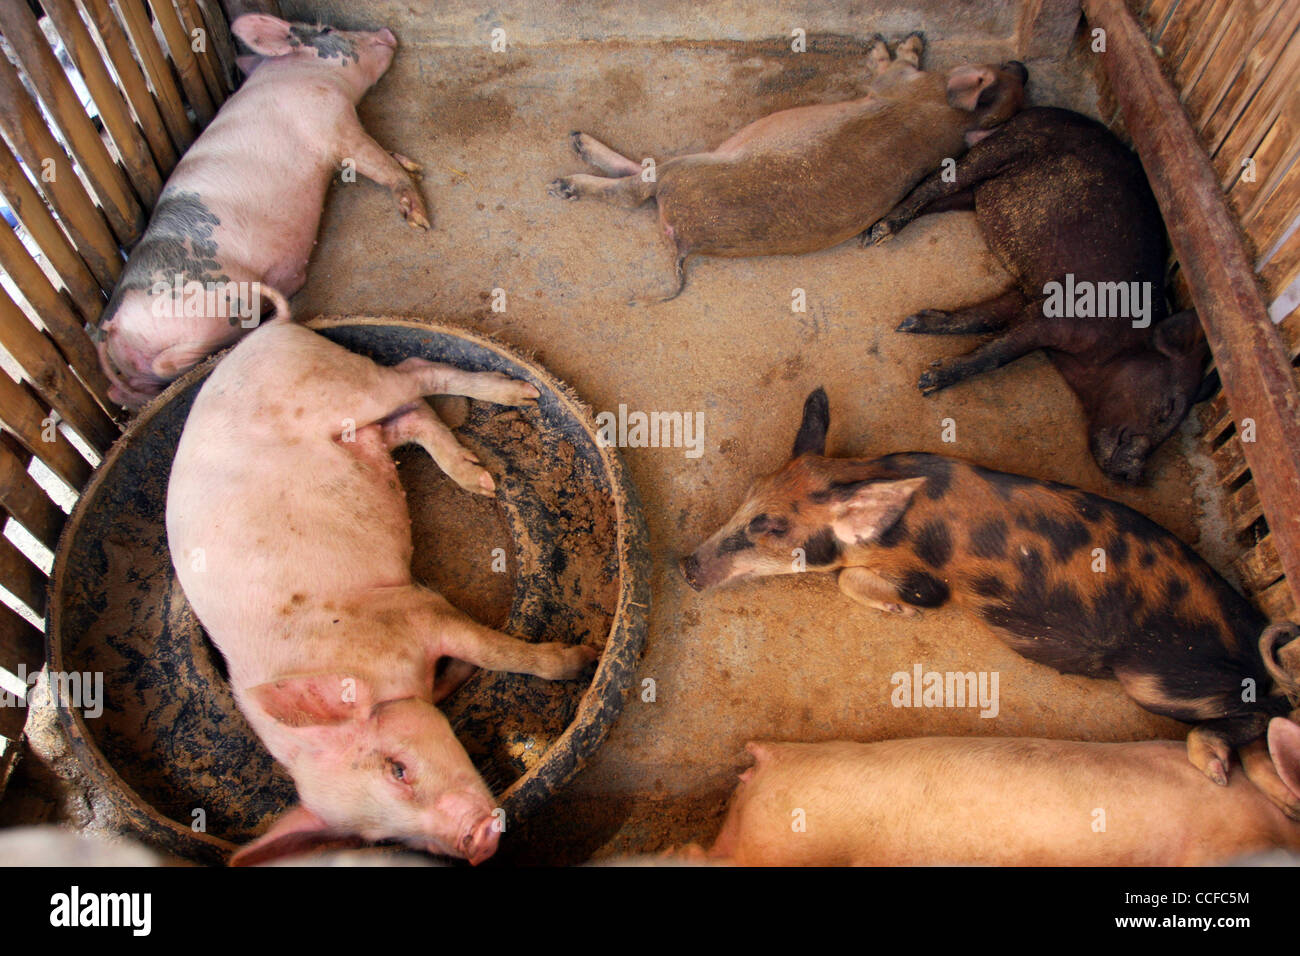 Dec 31, 2010 - Cotabato, Philippines - Filipino workers inside a meat shop in the southern Philippine city of Cotabato prepare and roast pigs, a popular dish for holidays and special occasions. Live pigs inside the meat shop. (Credit Image: © Jeoffrey Maitem/ZUMApress.com) Stock Photo